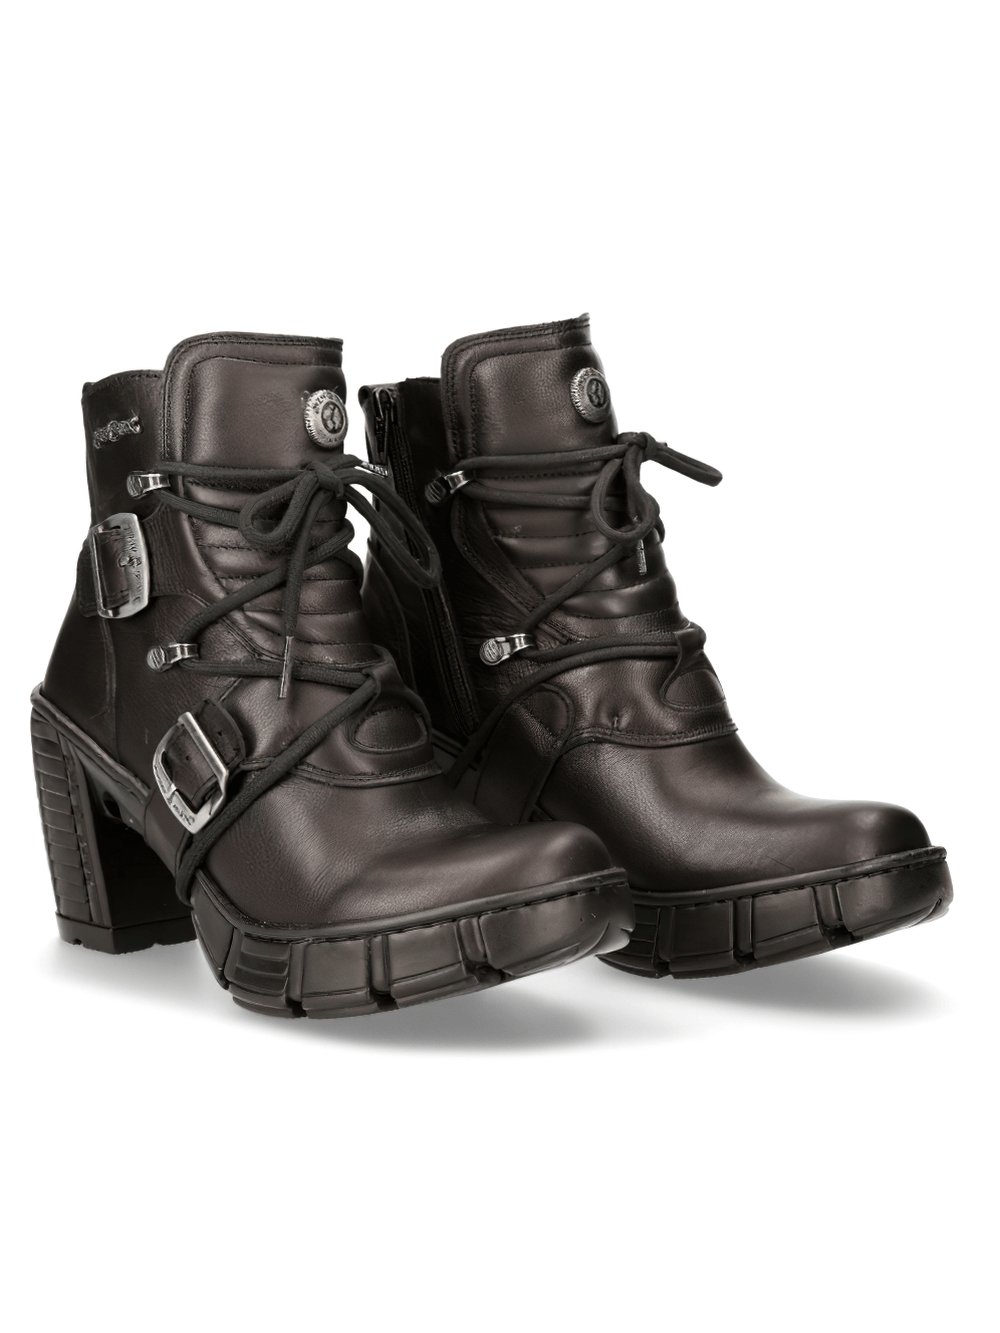 NEW ROCK Gothic Rock Ankle Boots - Metallic Buckle Detail